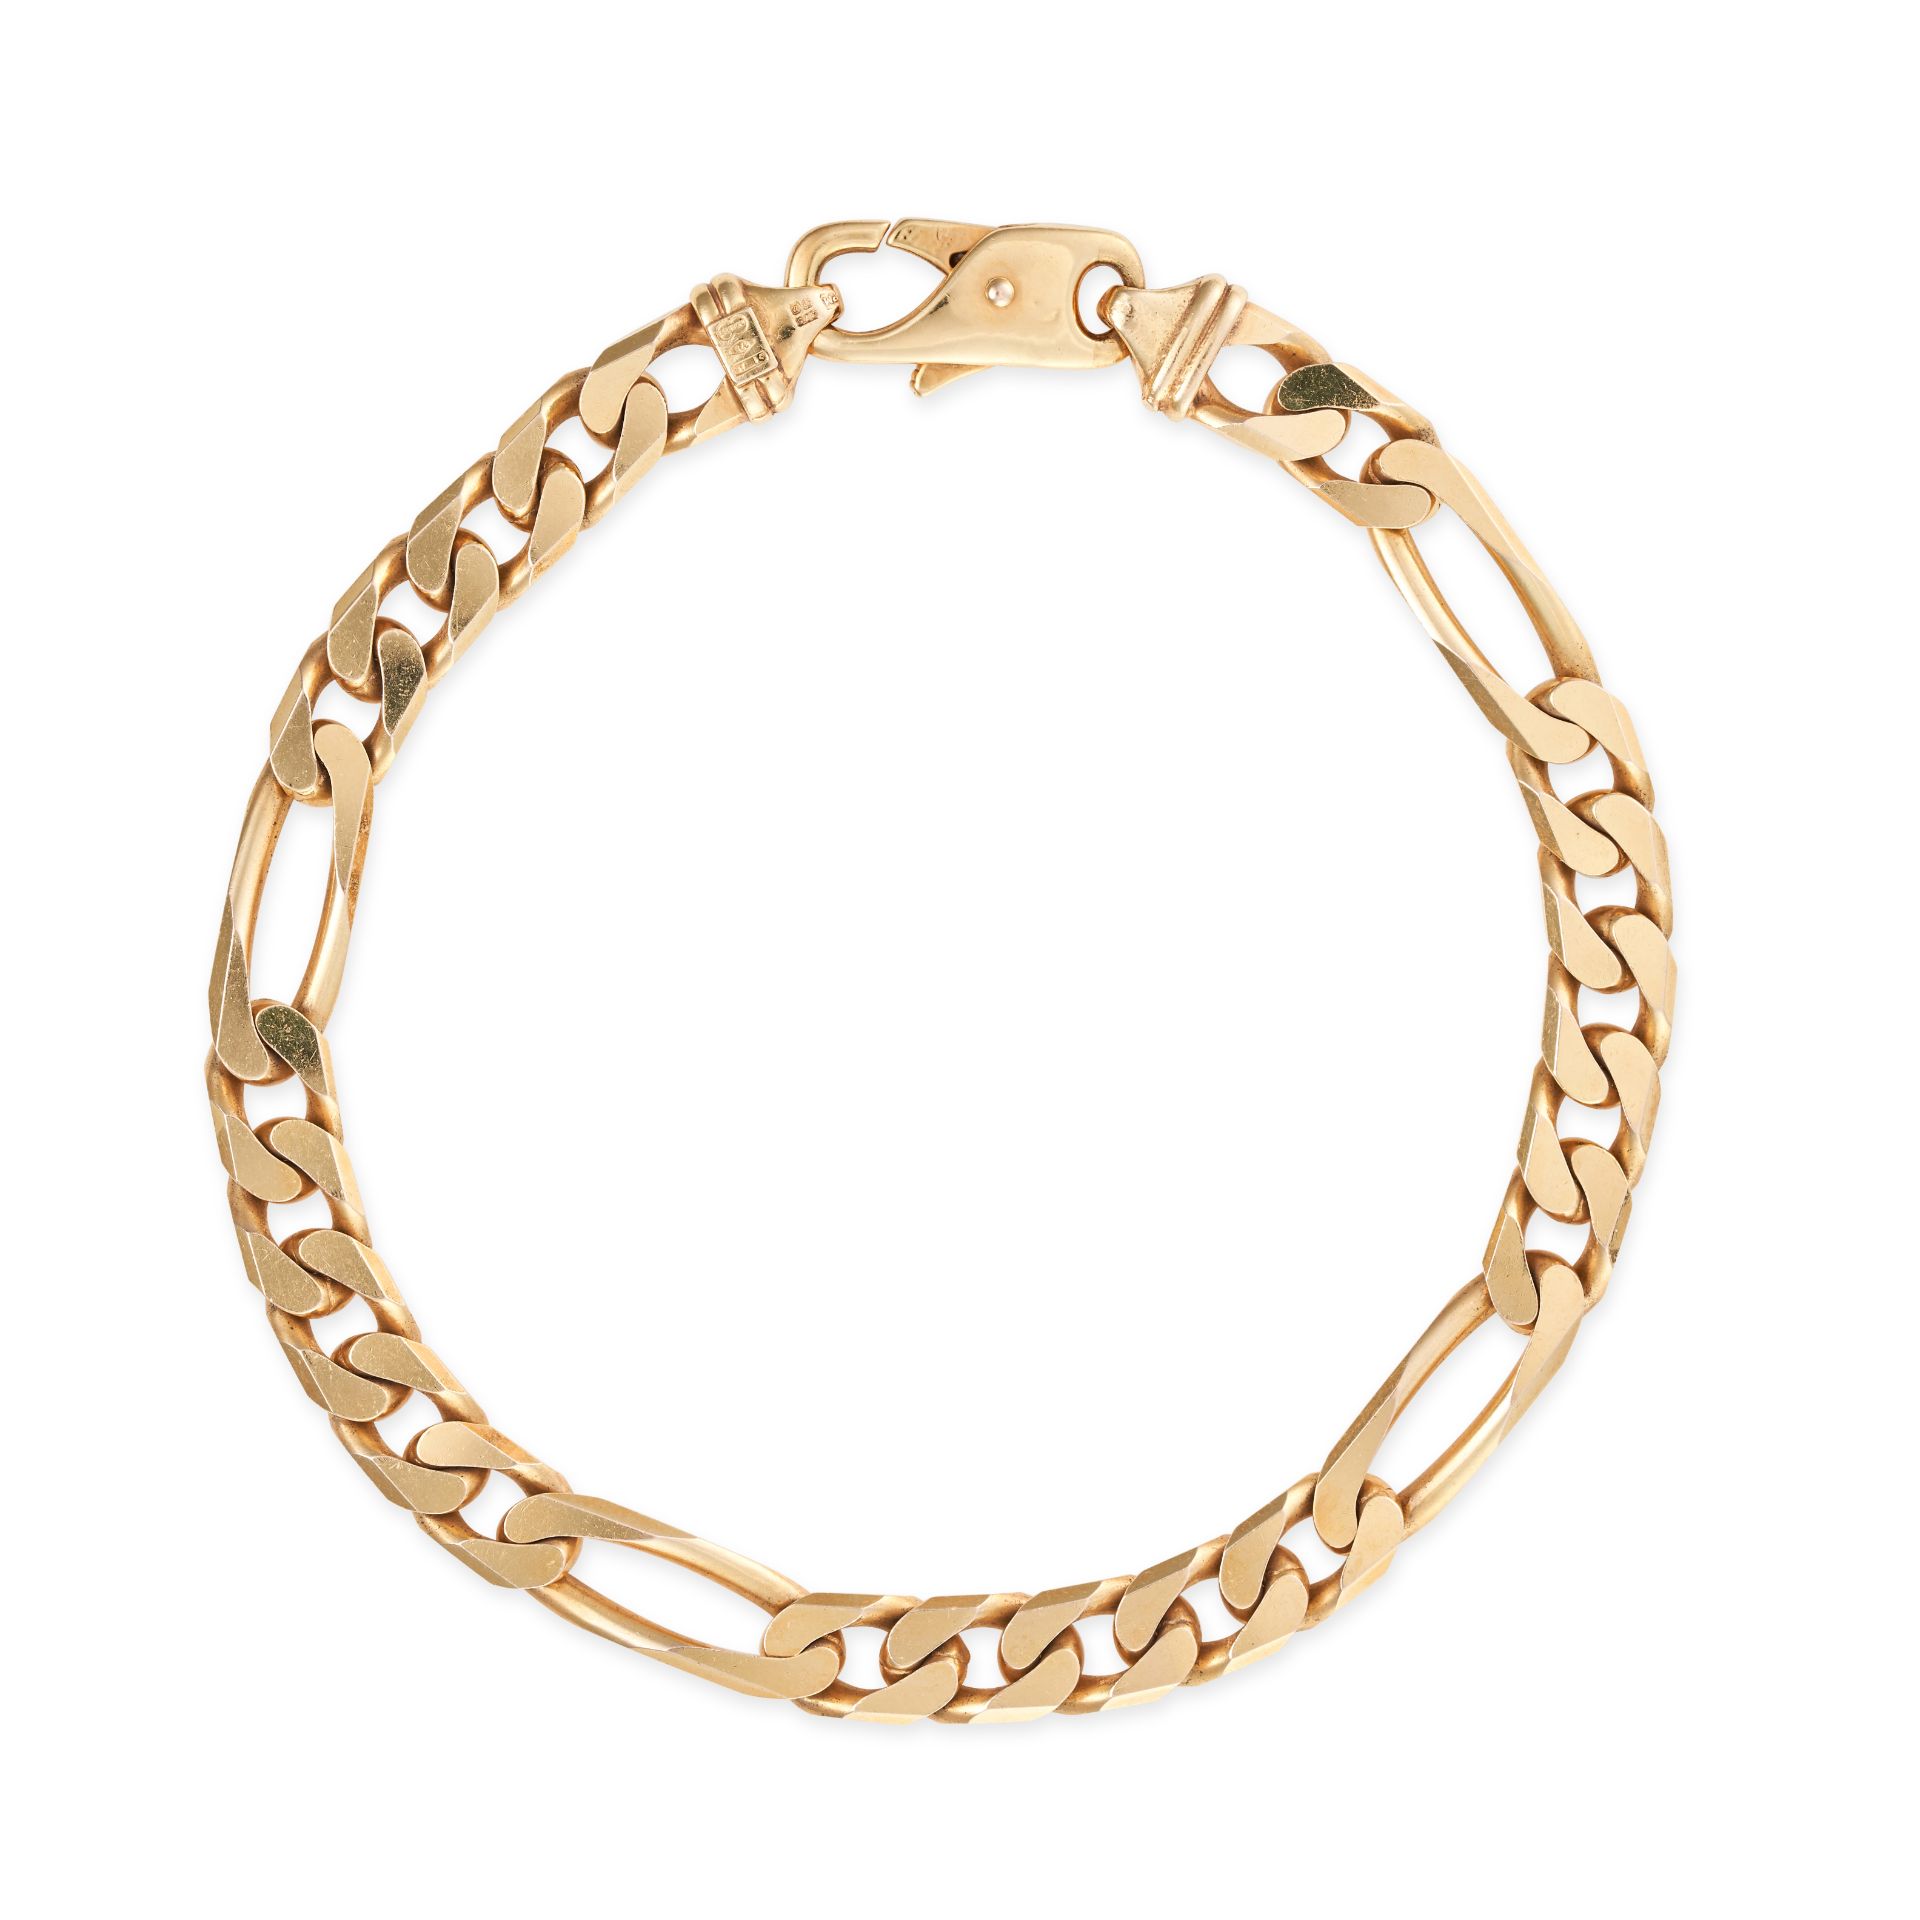 NO RESERVE - A FIGARO BRACELET in 9ct yellow gold, comprising a row of figaro links, Italian assa...